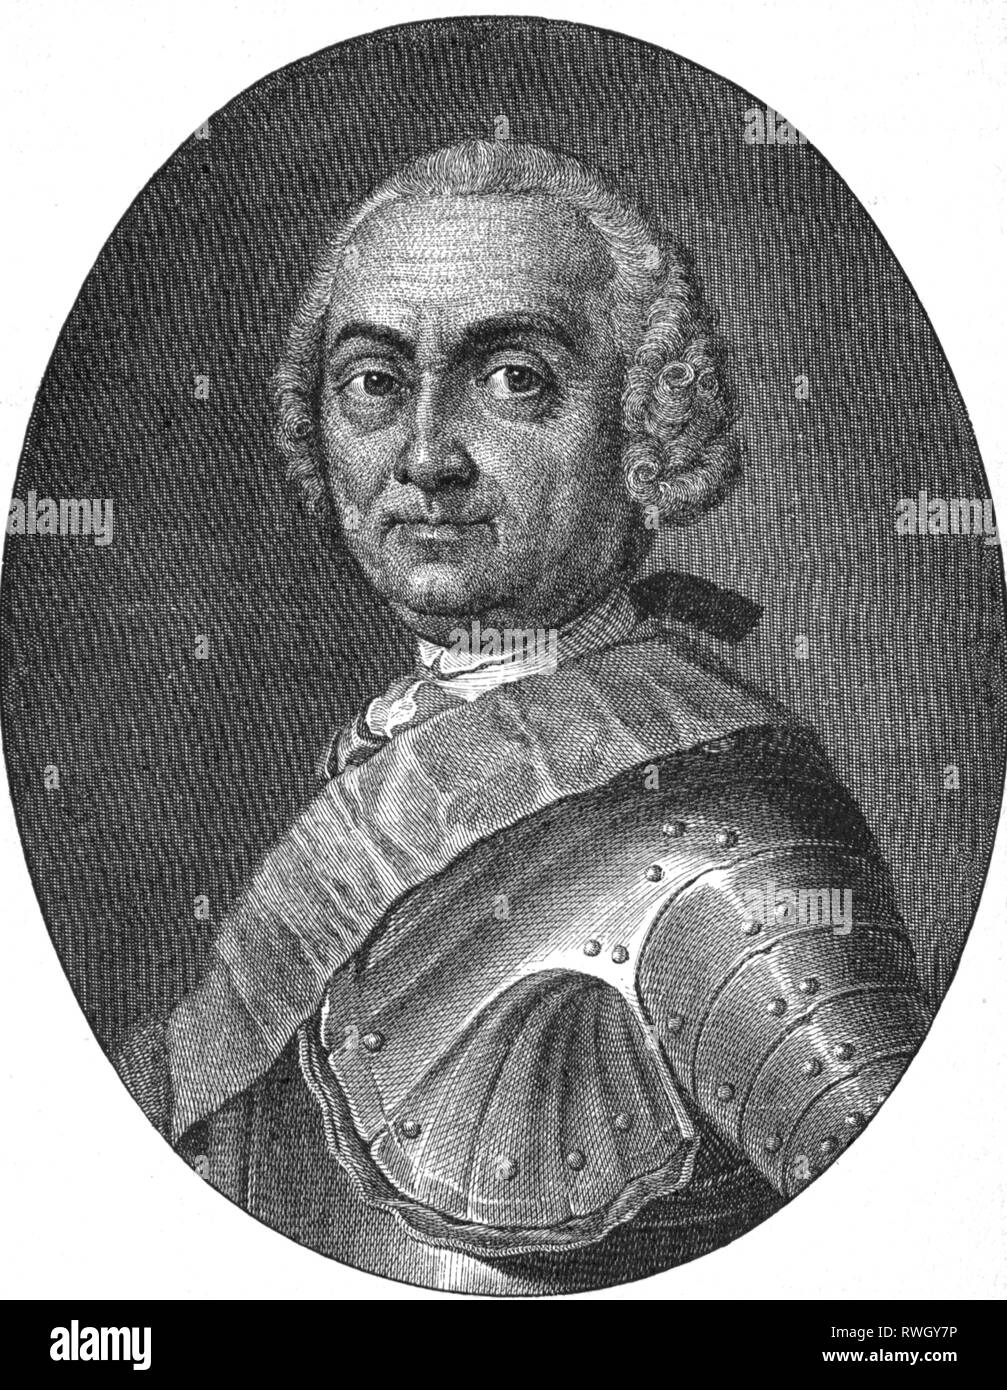 Schwerin, Kurt Christoph Count of, 26.10.1684 - 6.5.1757, German general, portrait, copper engraving by Philipp Andreas Kilian based on painting by Johann George Stranz, 18th century, Artist's Copyright has not to be cleared Stock Photo